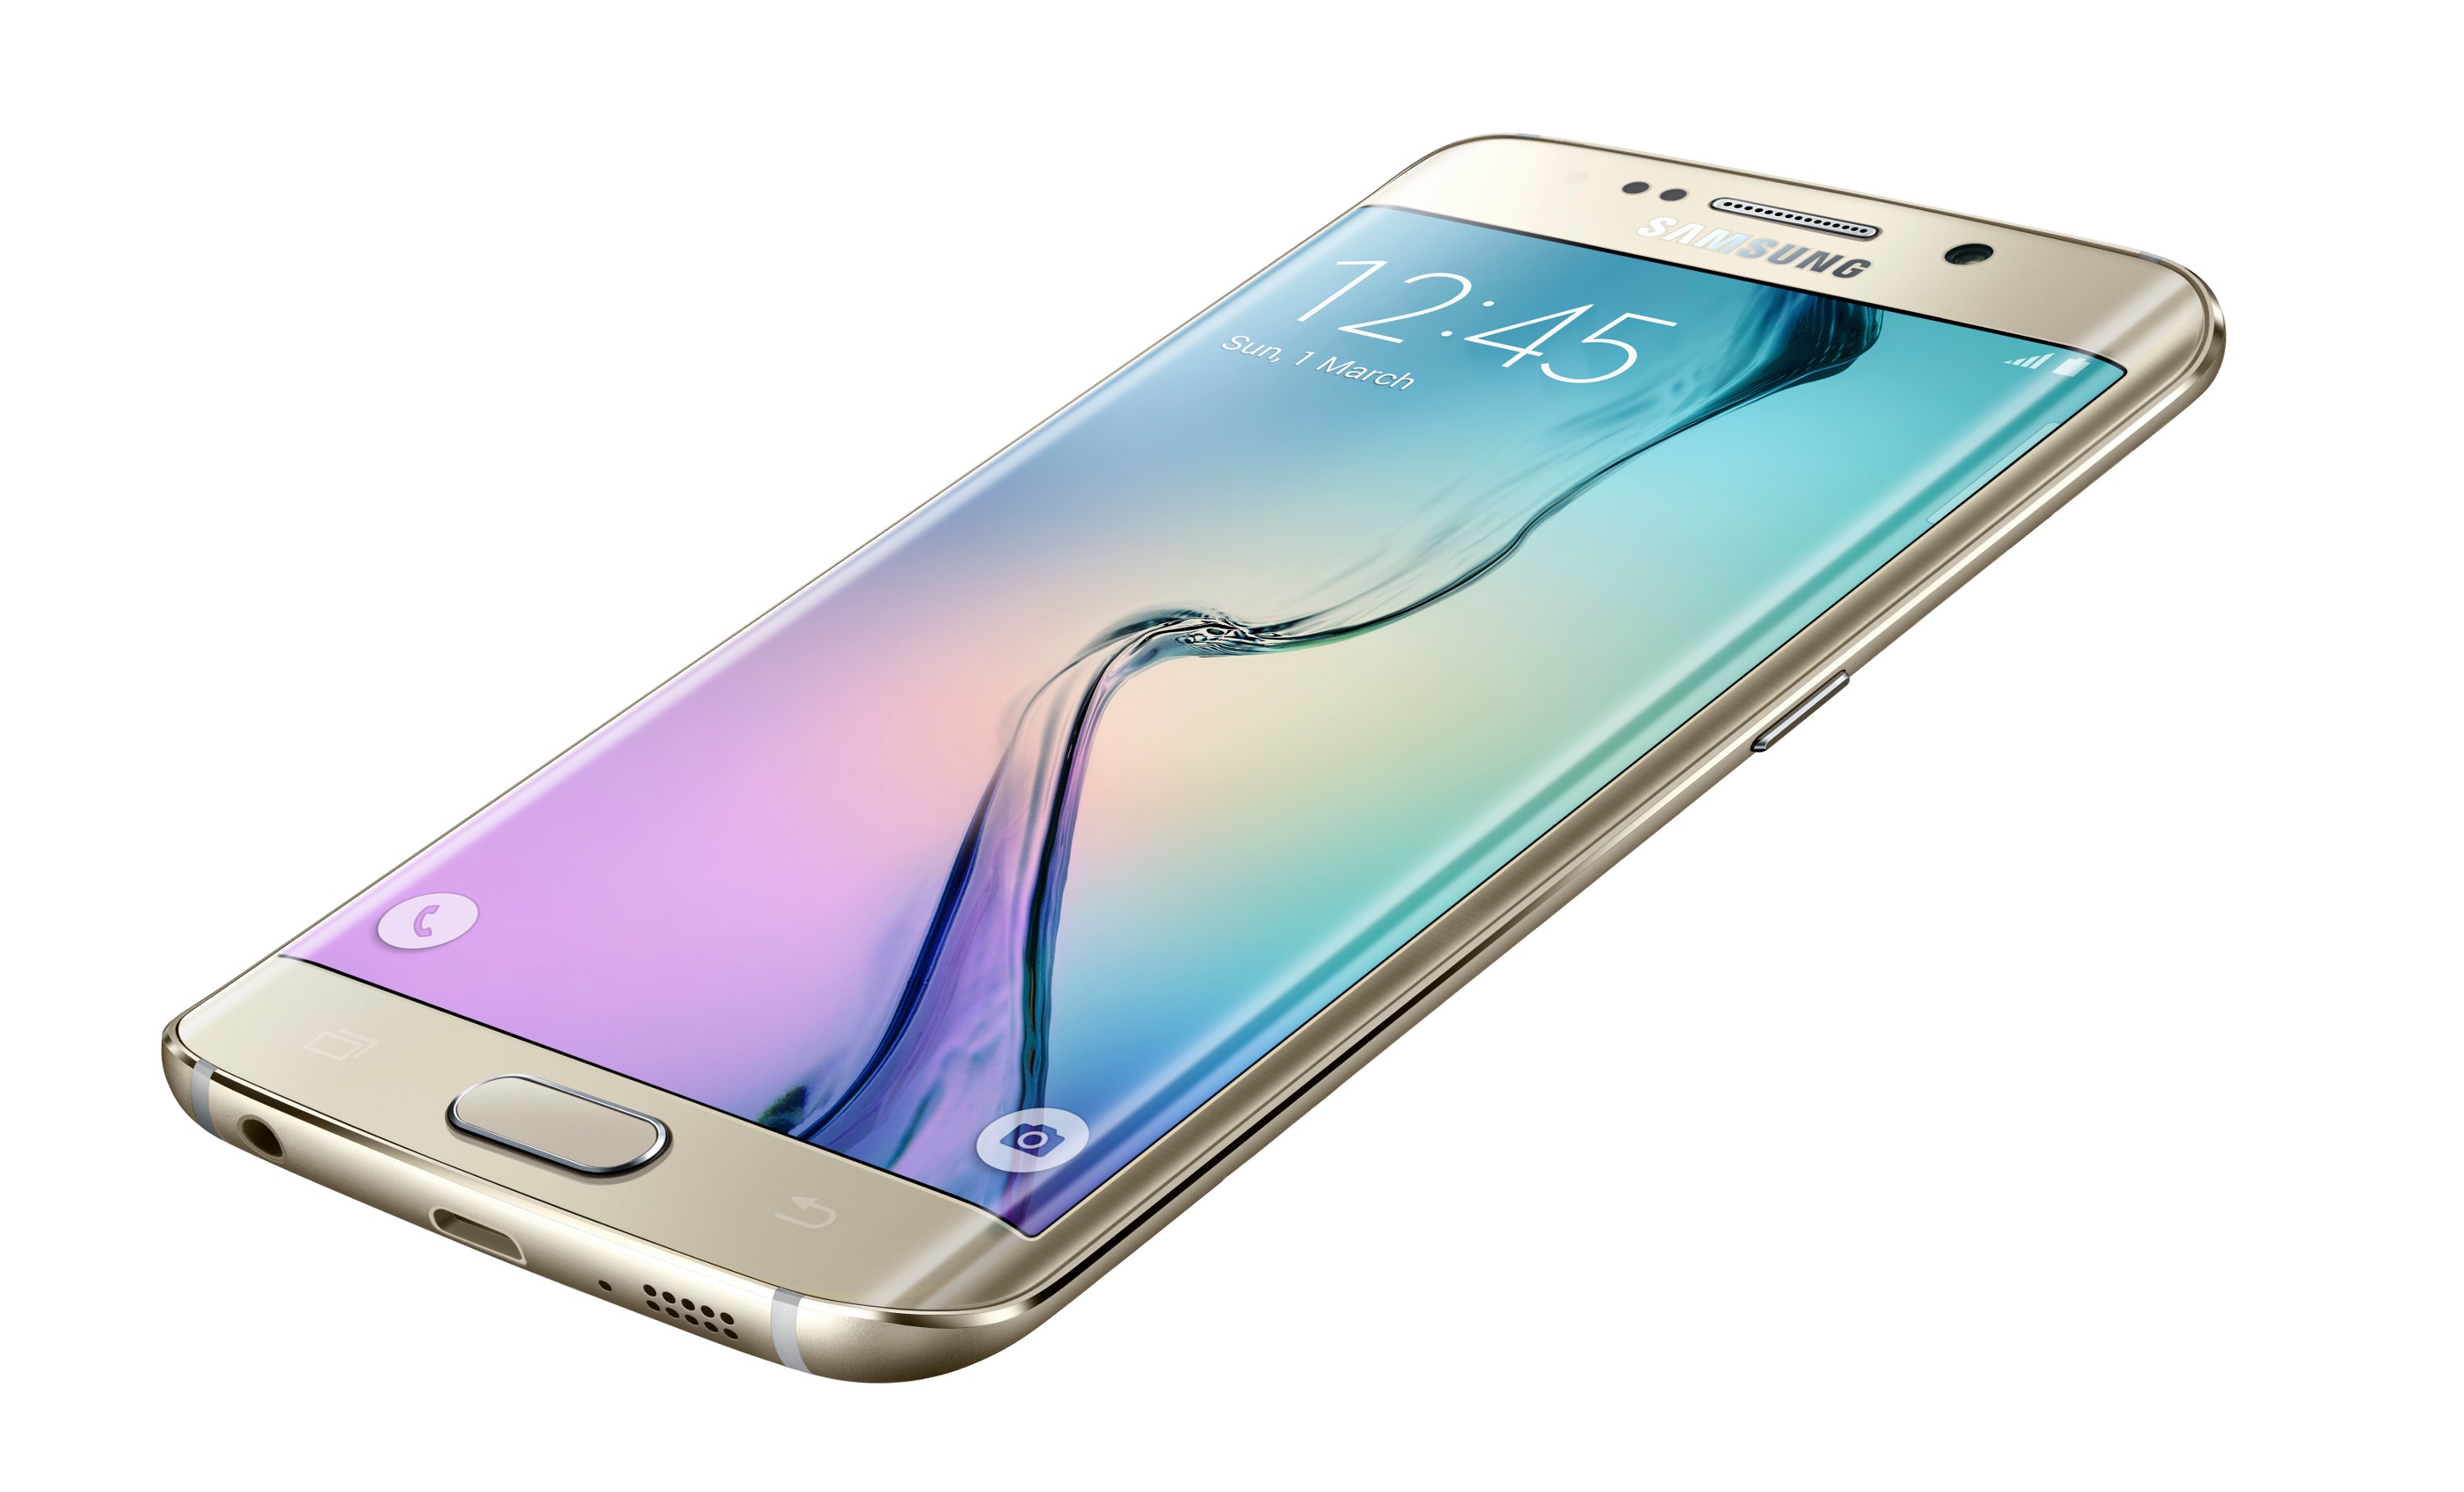 Galaxy-s7-samsung-galaxy-unpacked-2016-canceled-galaxy-s7-release-date-4k-display